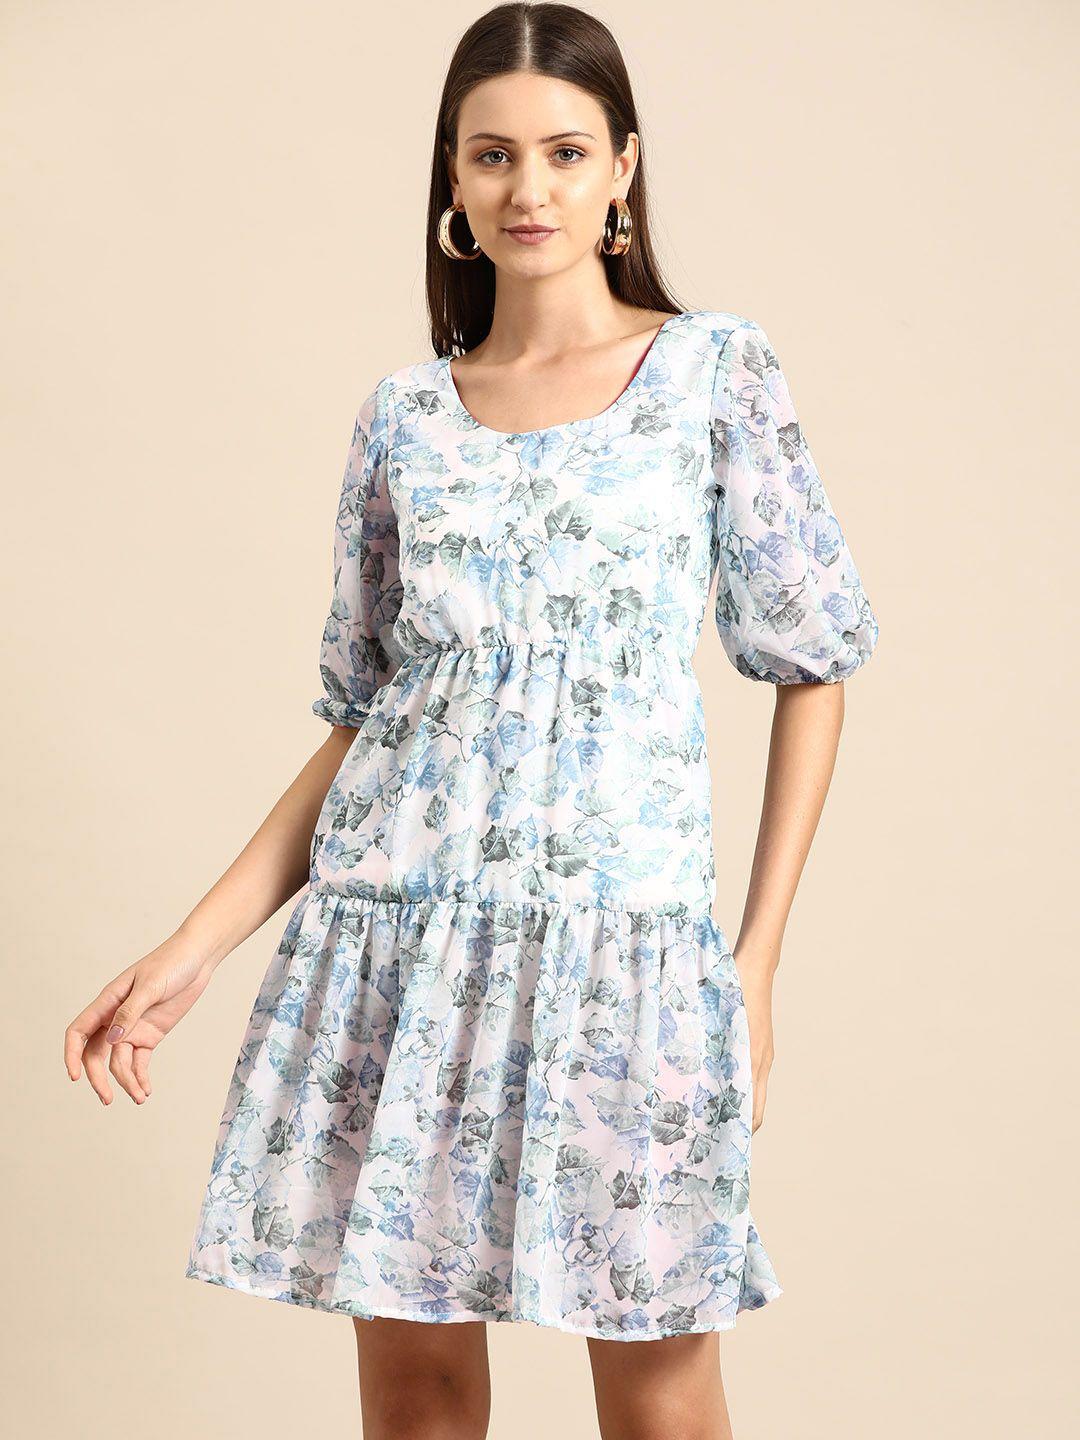 dodo & moa floral printed puff sleeve crepe fit & flare dress